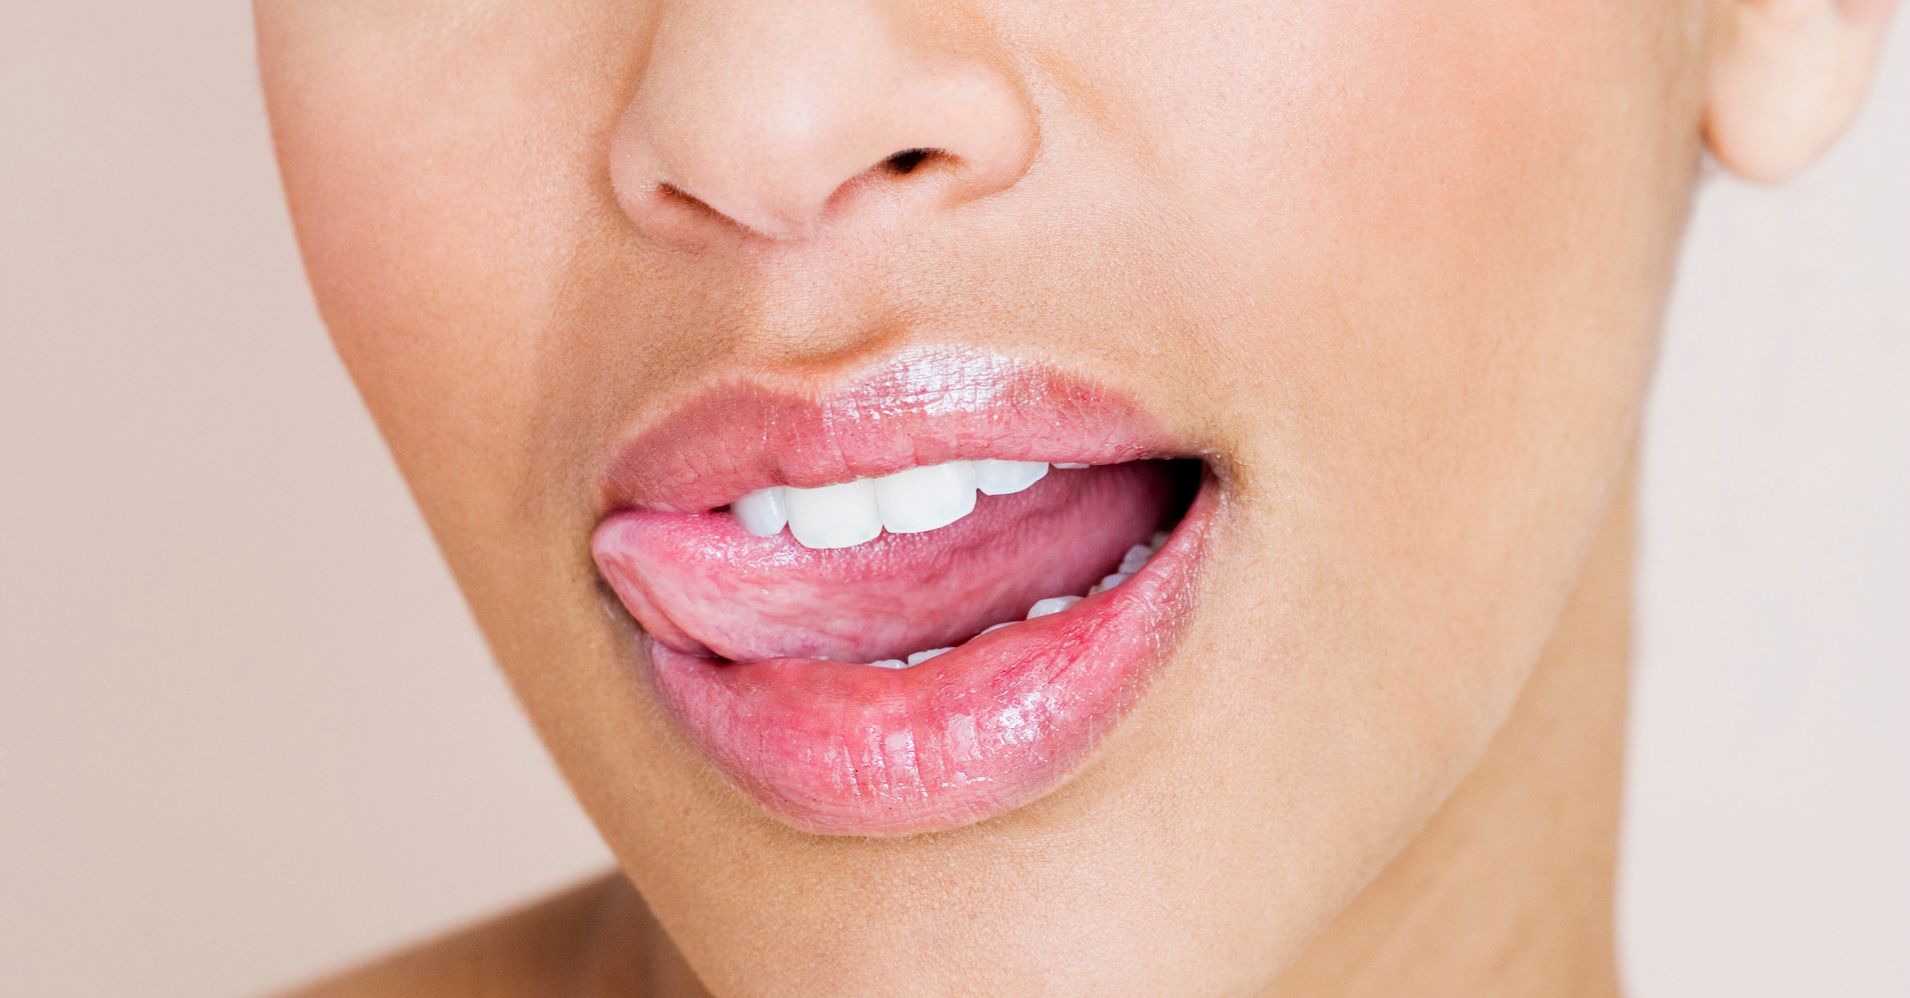 5 Things That Can Make Chapped Lips Worse According To Dermatologists